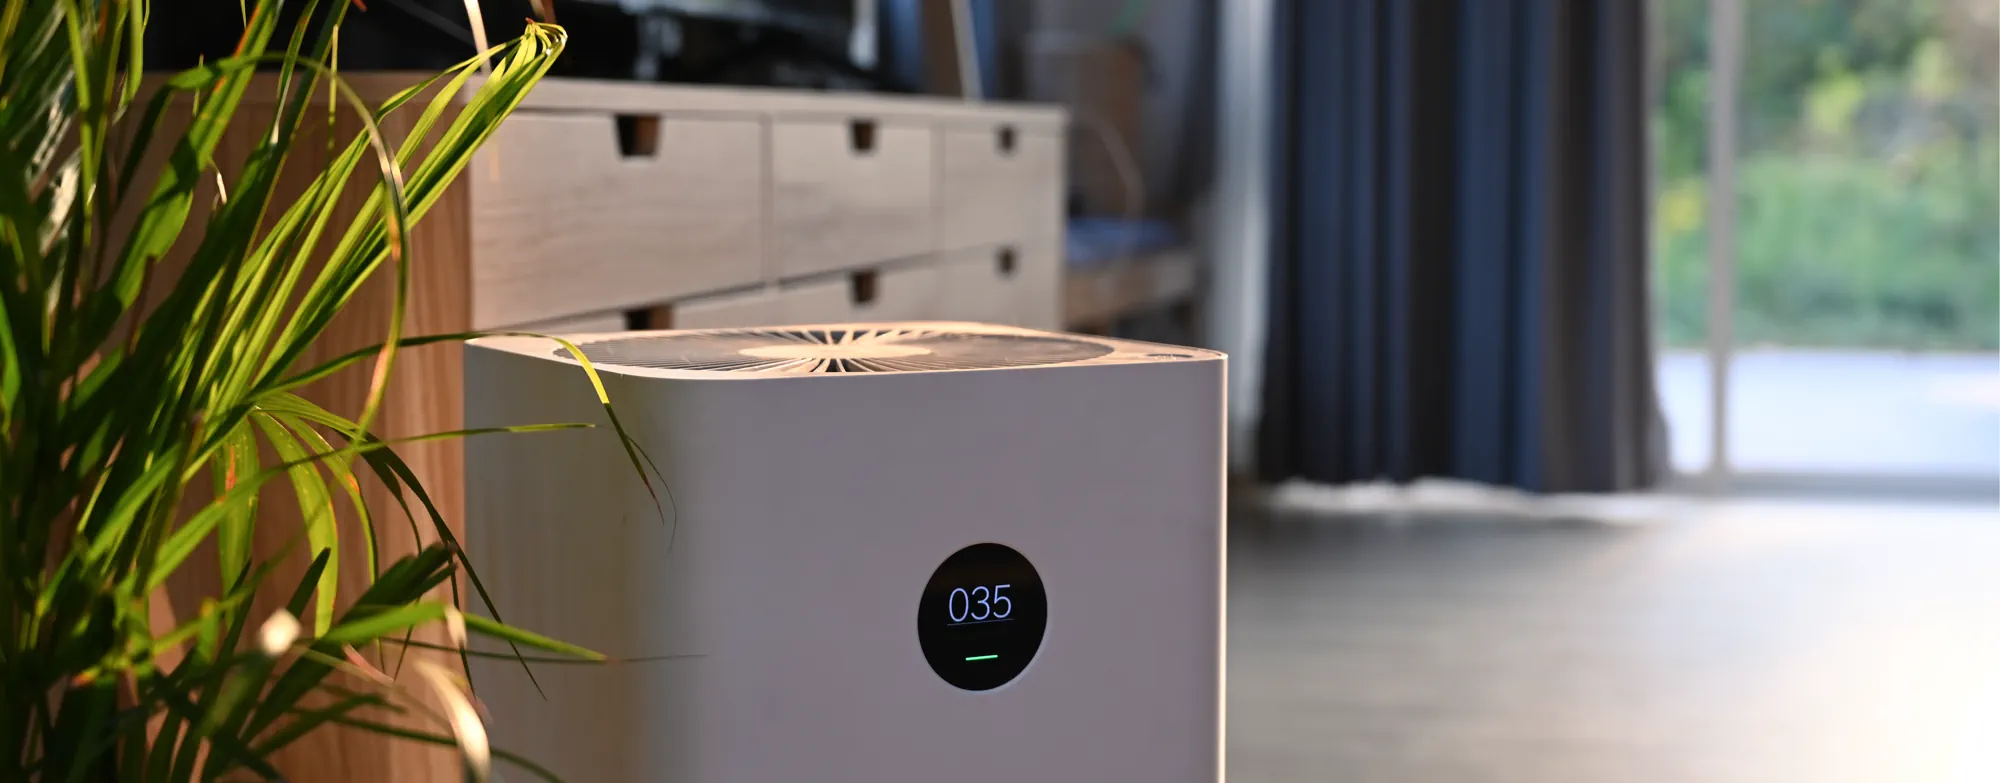 Air purifier set in front of a bedroom dresser to improve indoor air quality (IAQ).